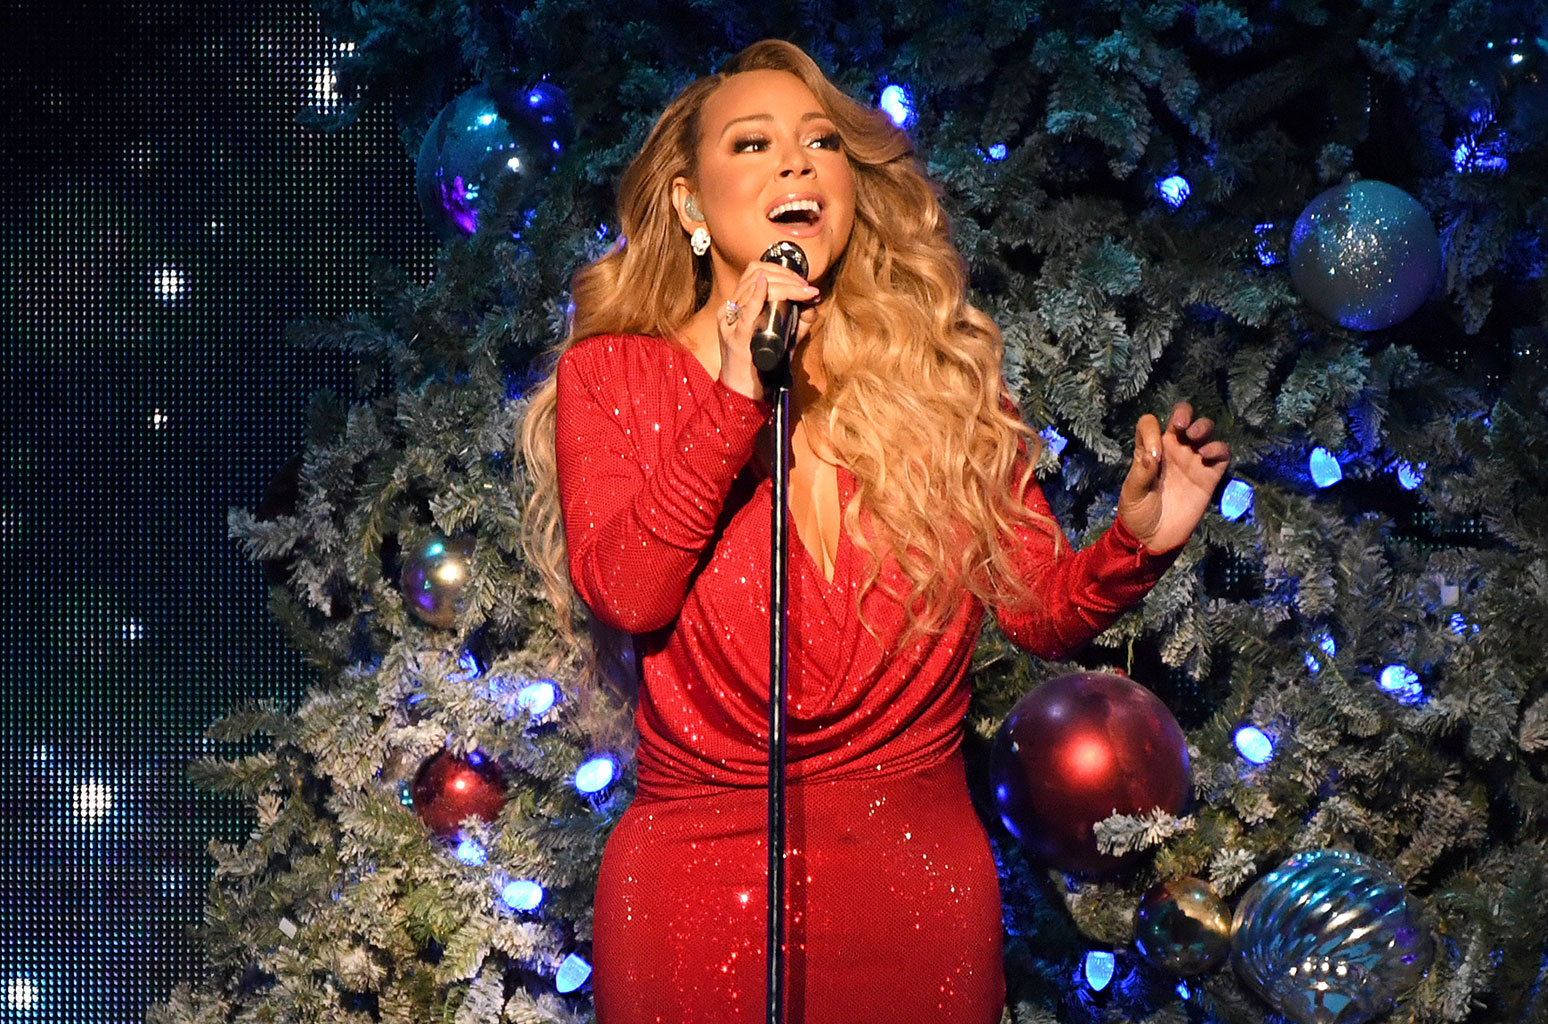 See How Billy Eichner &amp; the Lambily Celebrated Mariah Carey's Billboard Hot 100 No. 1 'All I Want For Christmas Is You' - www.billboard.com - New York